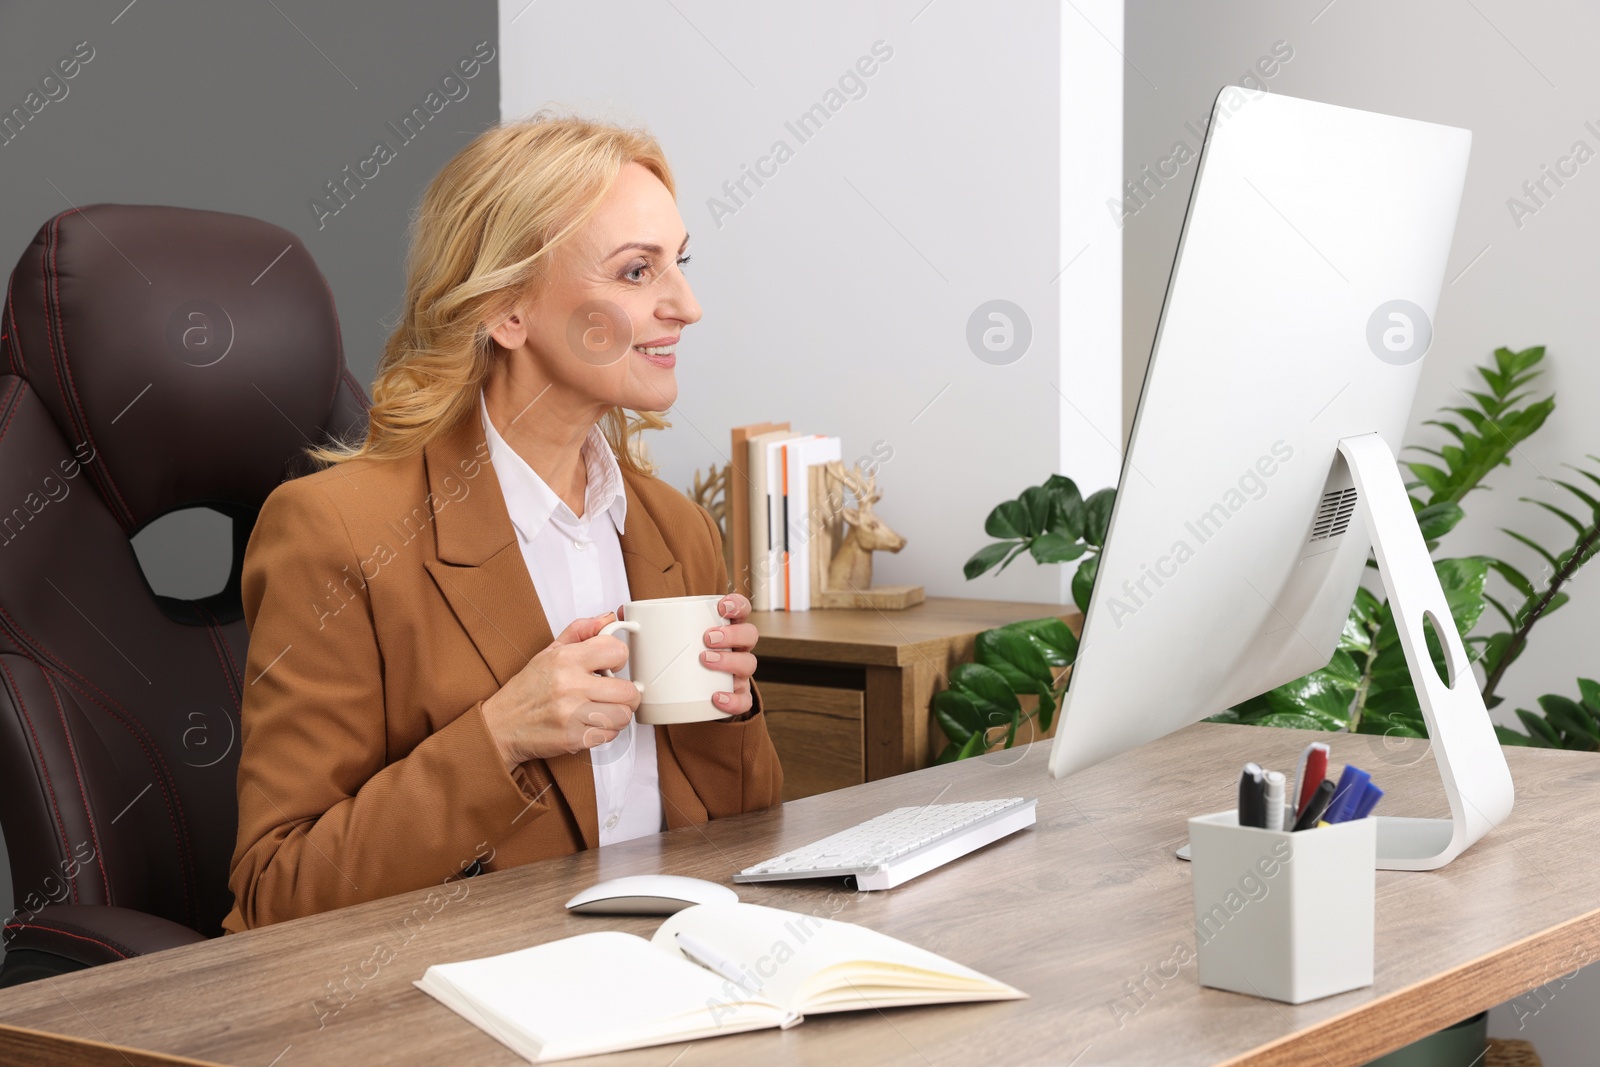 Photo of Lady boss with cup of drink near computer at desk in office. Successful businesswoman